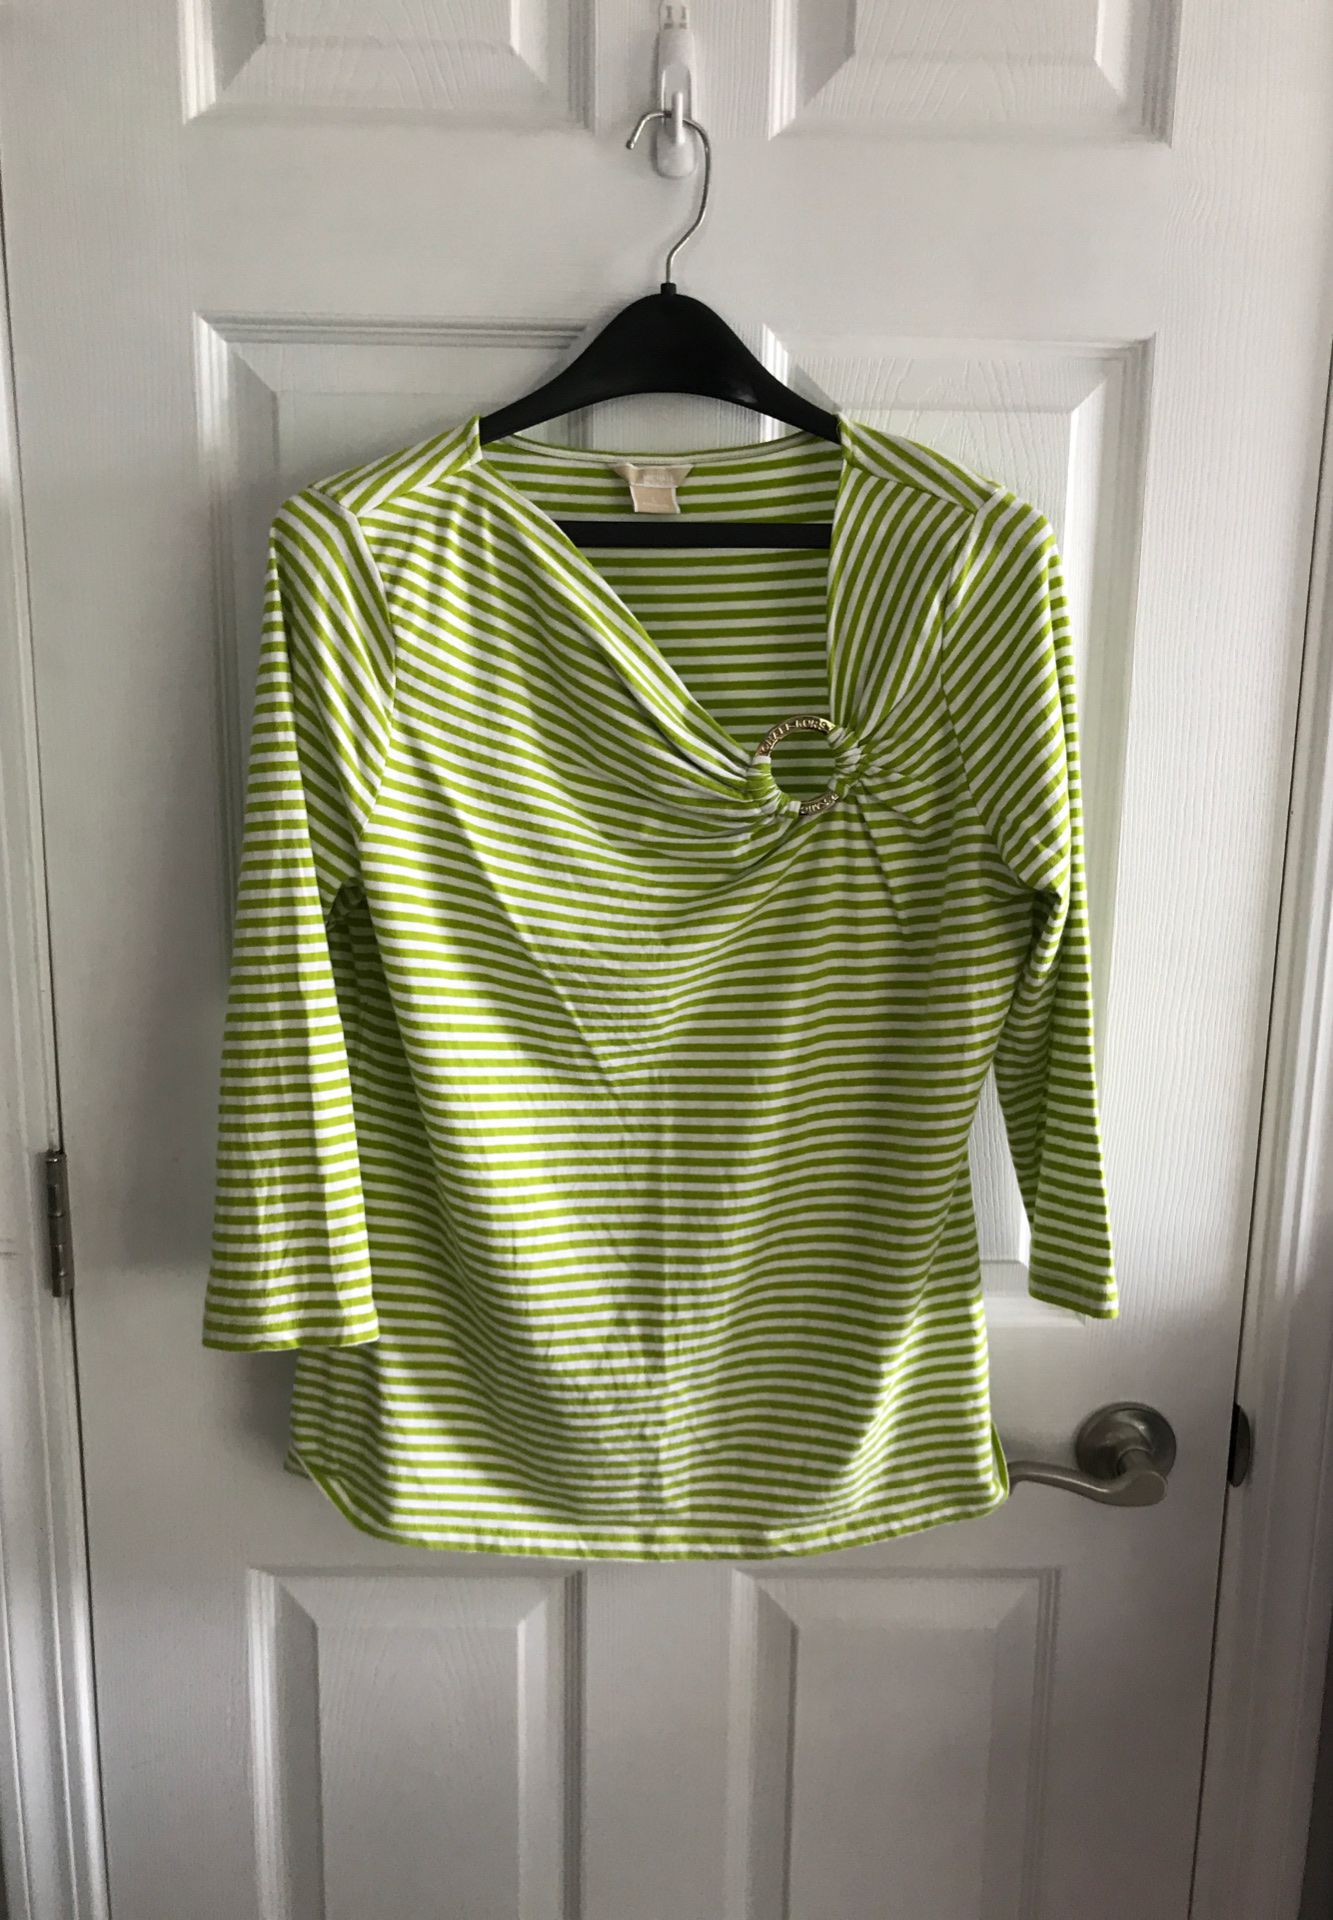 Michael Kors size large lime green and white striped blouse with gold Michael Kors accent